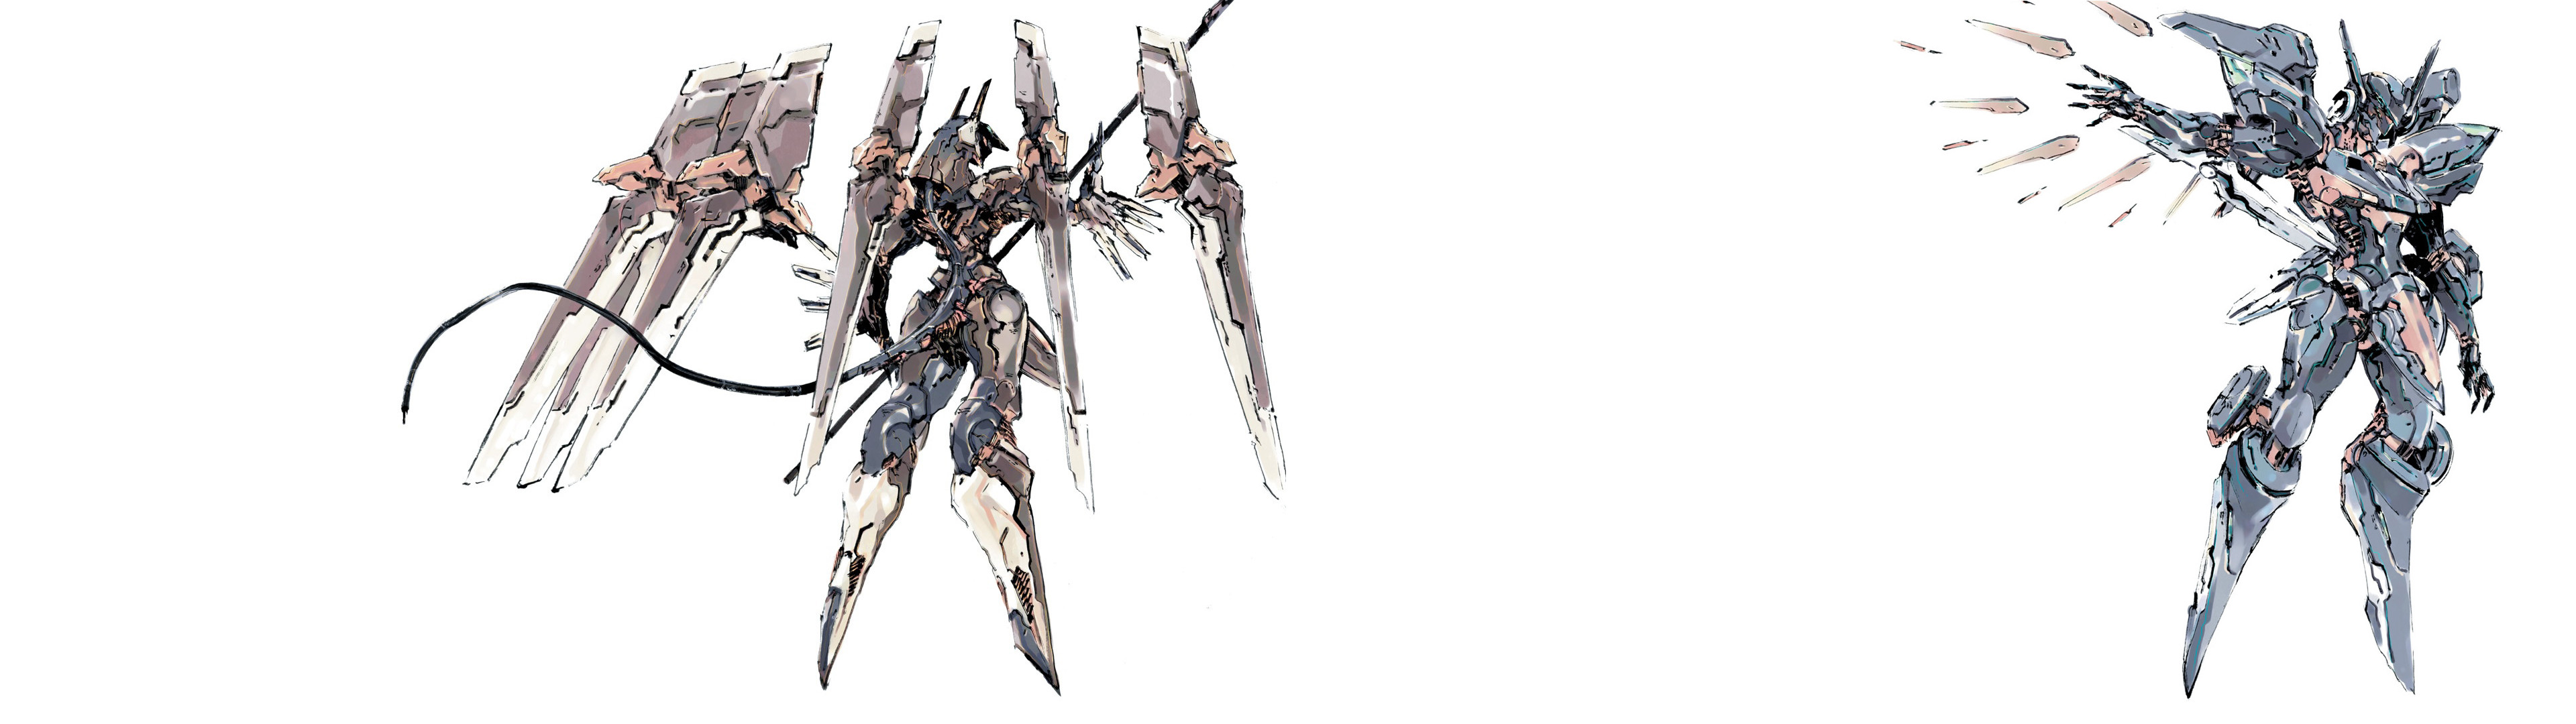 3840x1080 Zone of the Enders dual monitor wallpaper [] ...